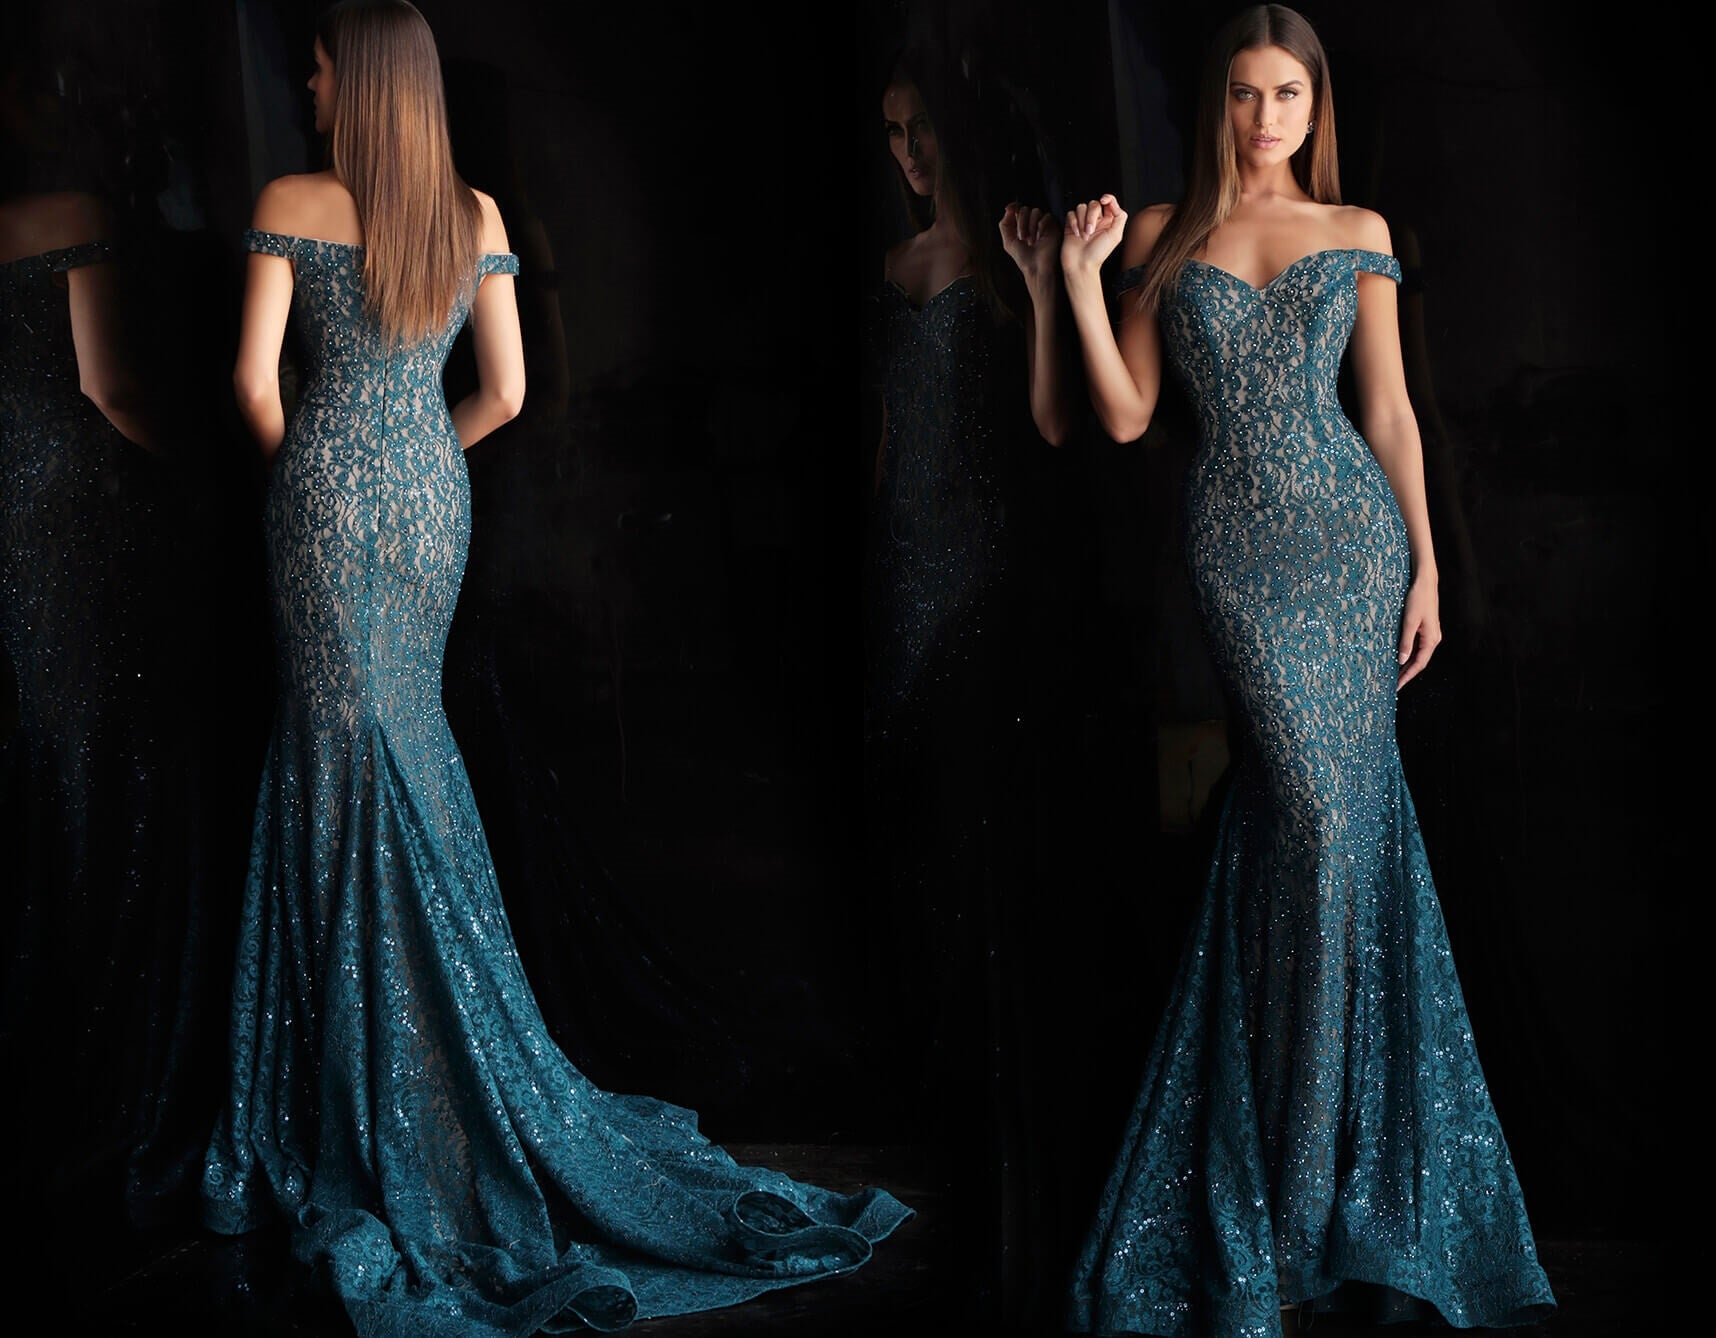 Jovani 64521 off the shoulder long train mermaid embellished lace prom dress   Available Colors: black,  peacock, red, steel, black/blue  Available Sizes: 00 - 24 Details:  underlay embellished lace prom dress with off-the-shoulder fitted bodice and sweetheart neckline, floor-length fitted skirt with a flared end and sweeping train. 